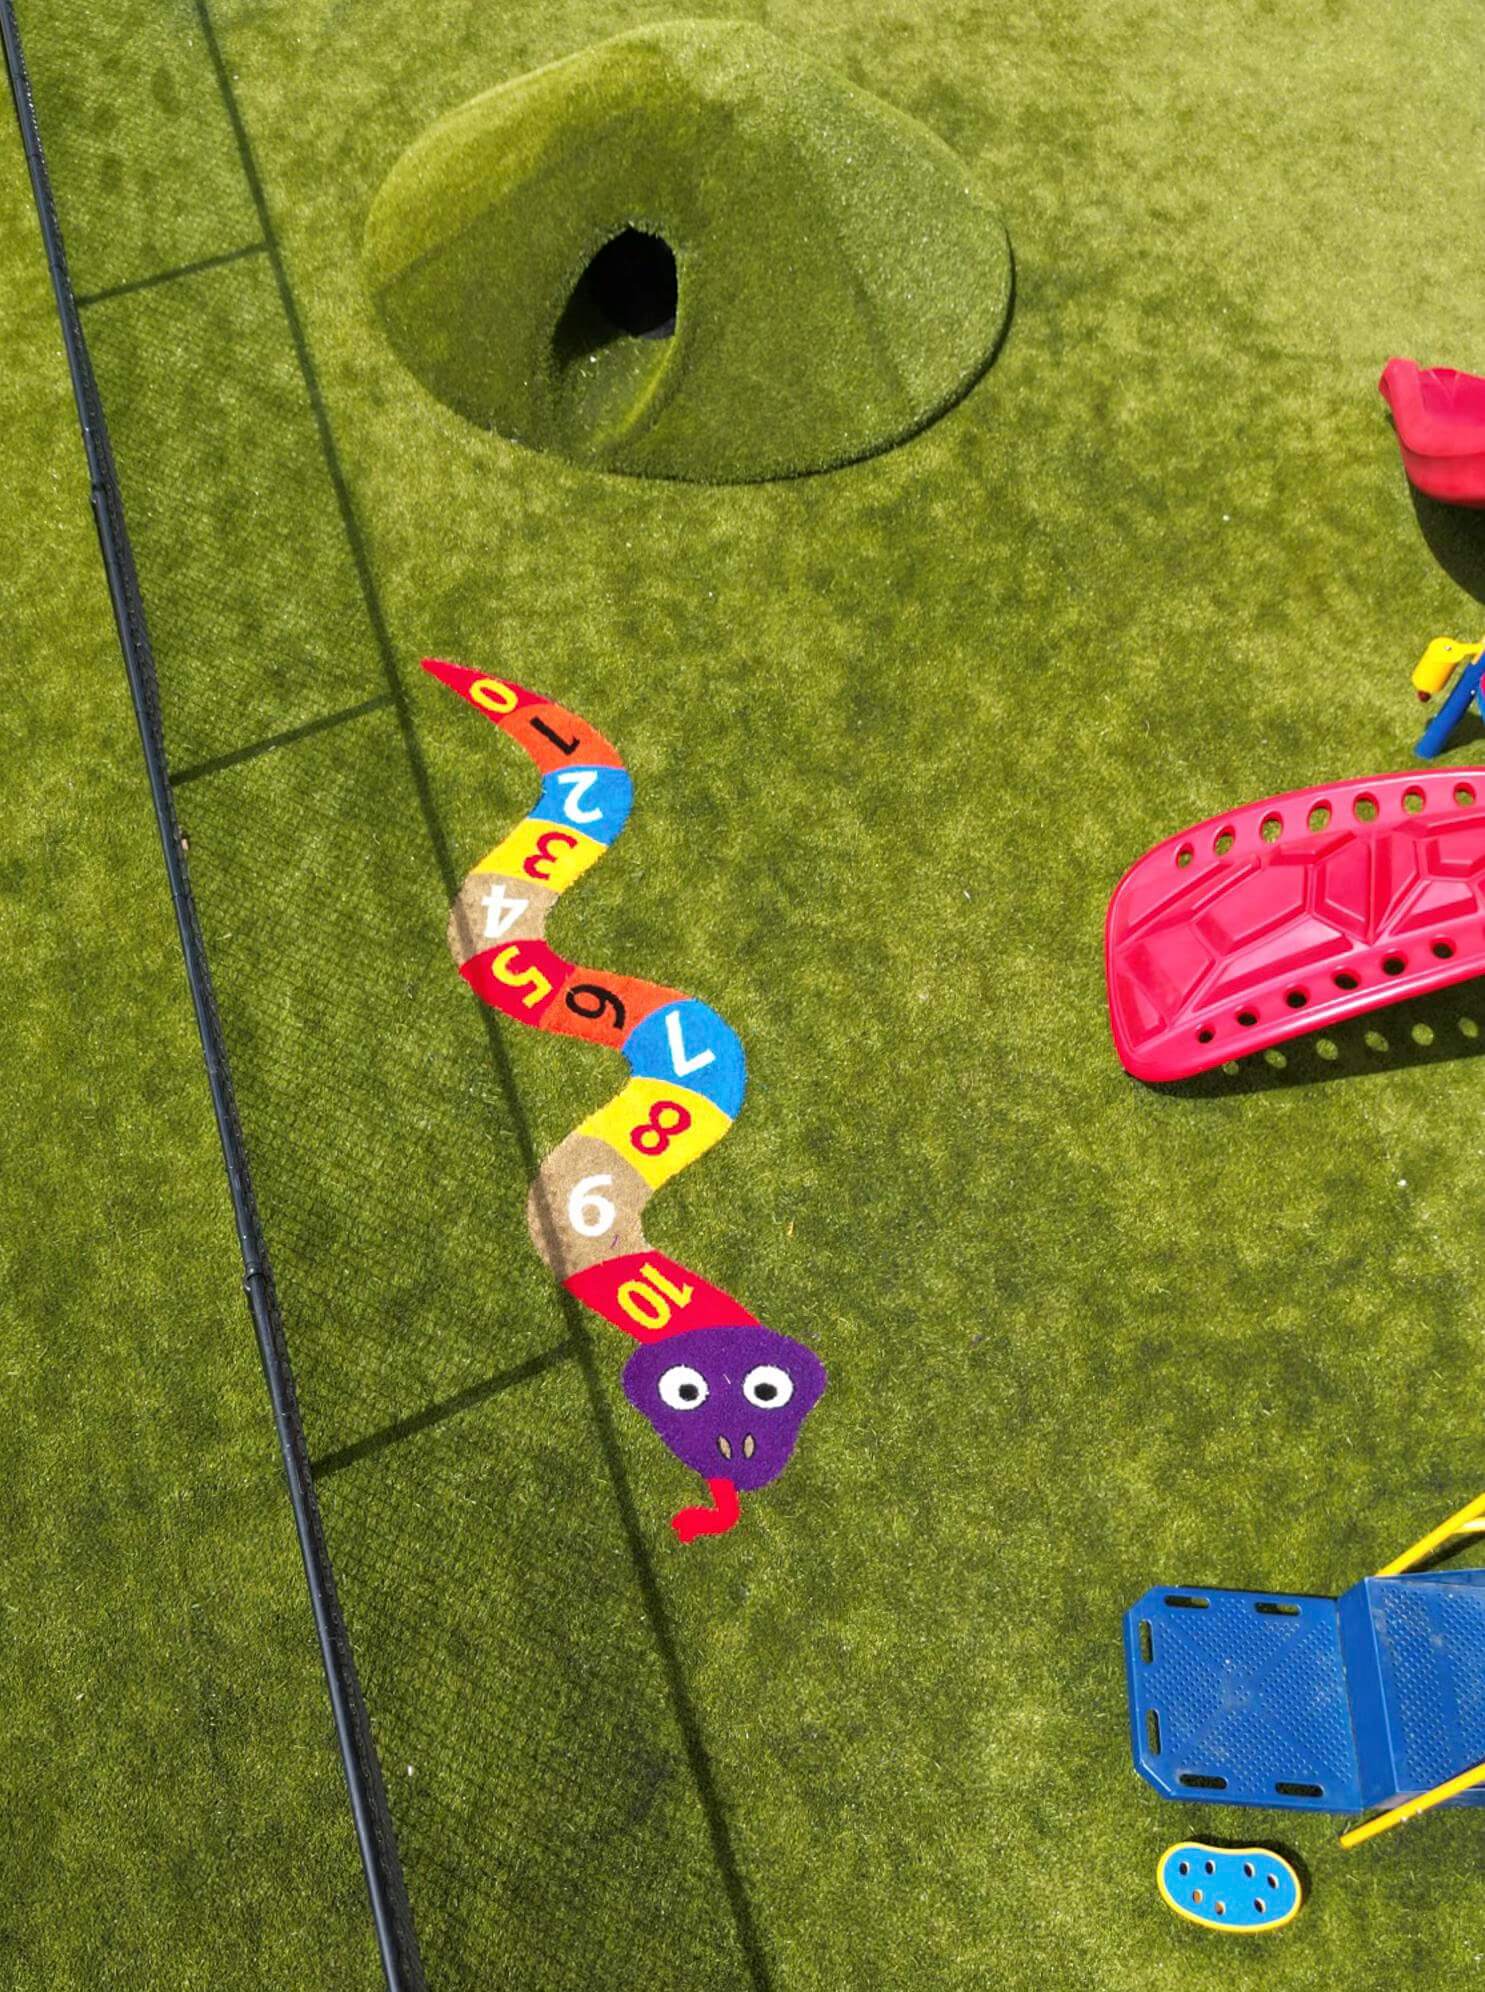 Close-up view of a playground hopscotch path featuring numbers and a cartoon snake design on artificial turf.